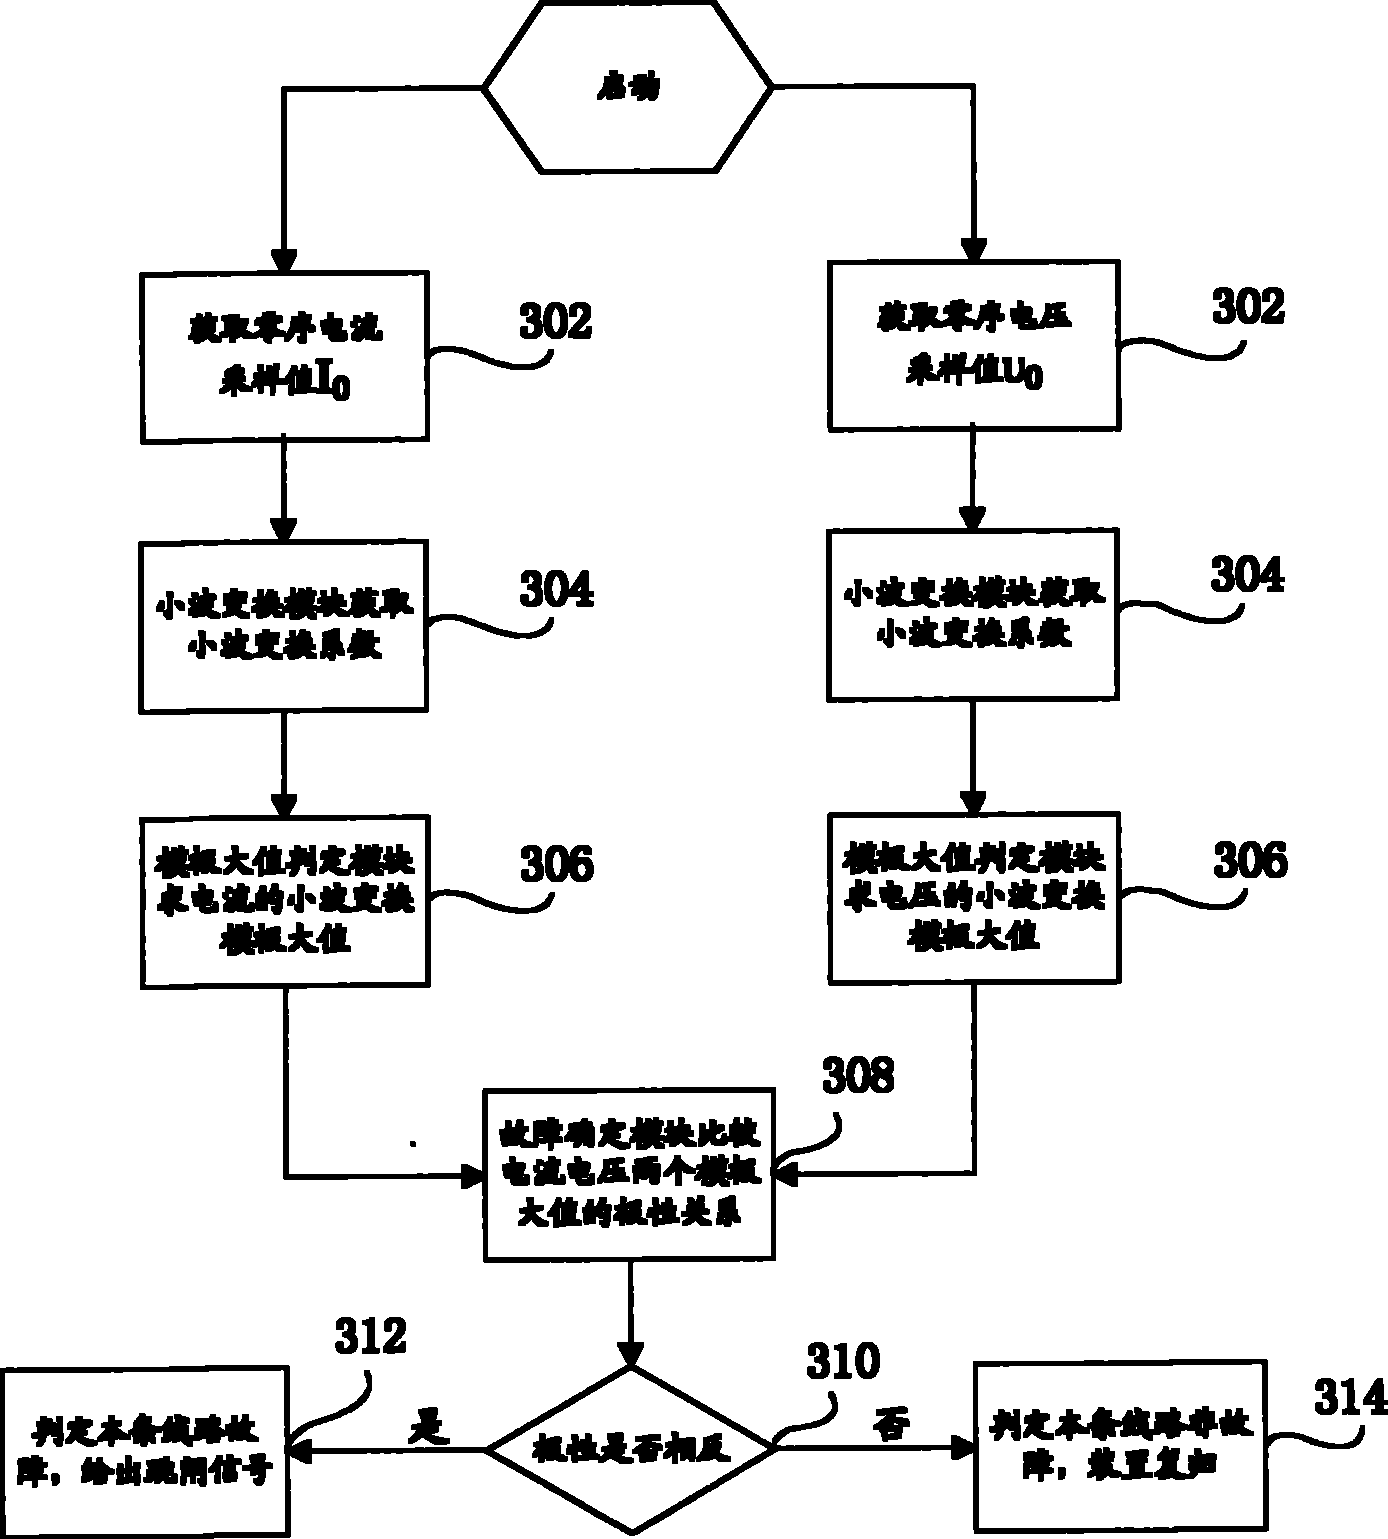 Single phase earthed relay protection device